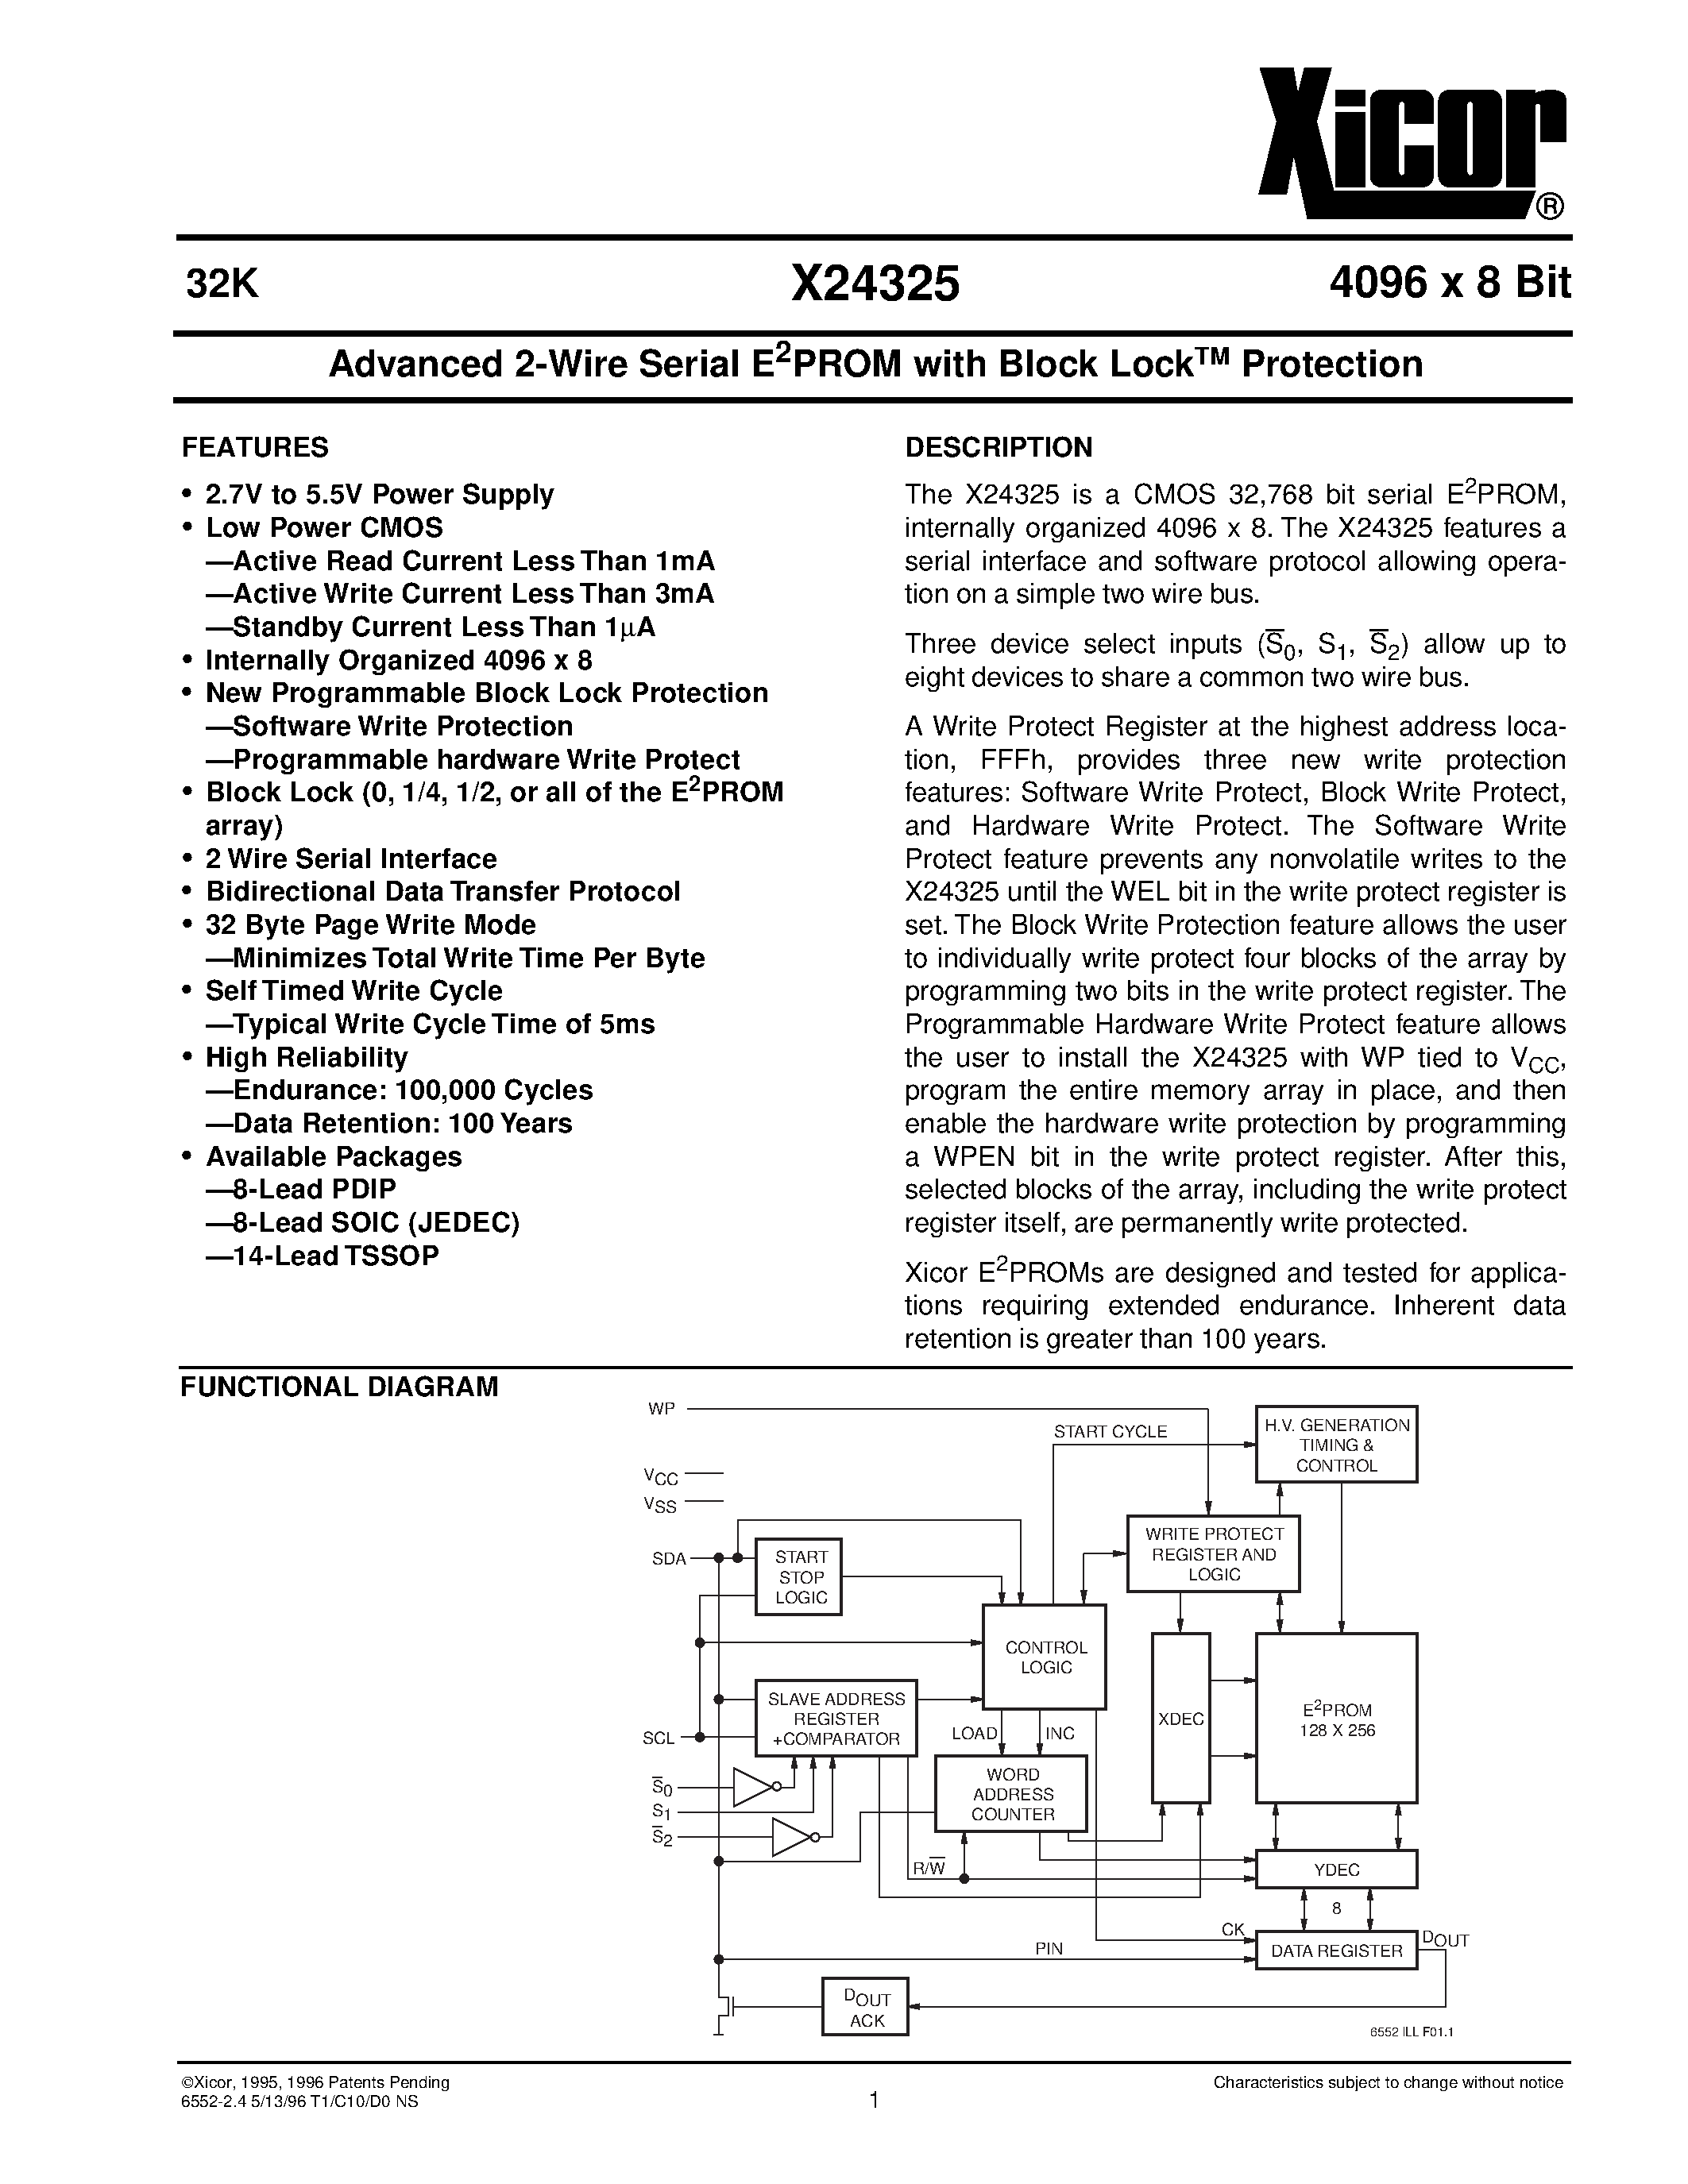 Datasheet X24325VI-2.7 - Advanced 2-Wire Serial E 2 PROM with Block Lock TM Protection page 1